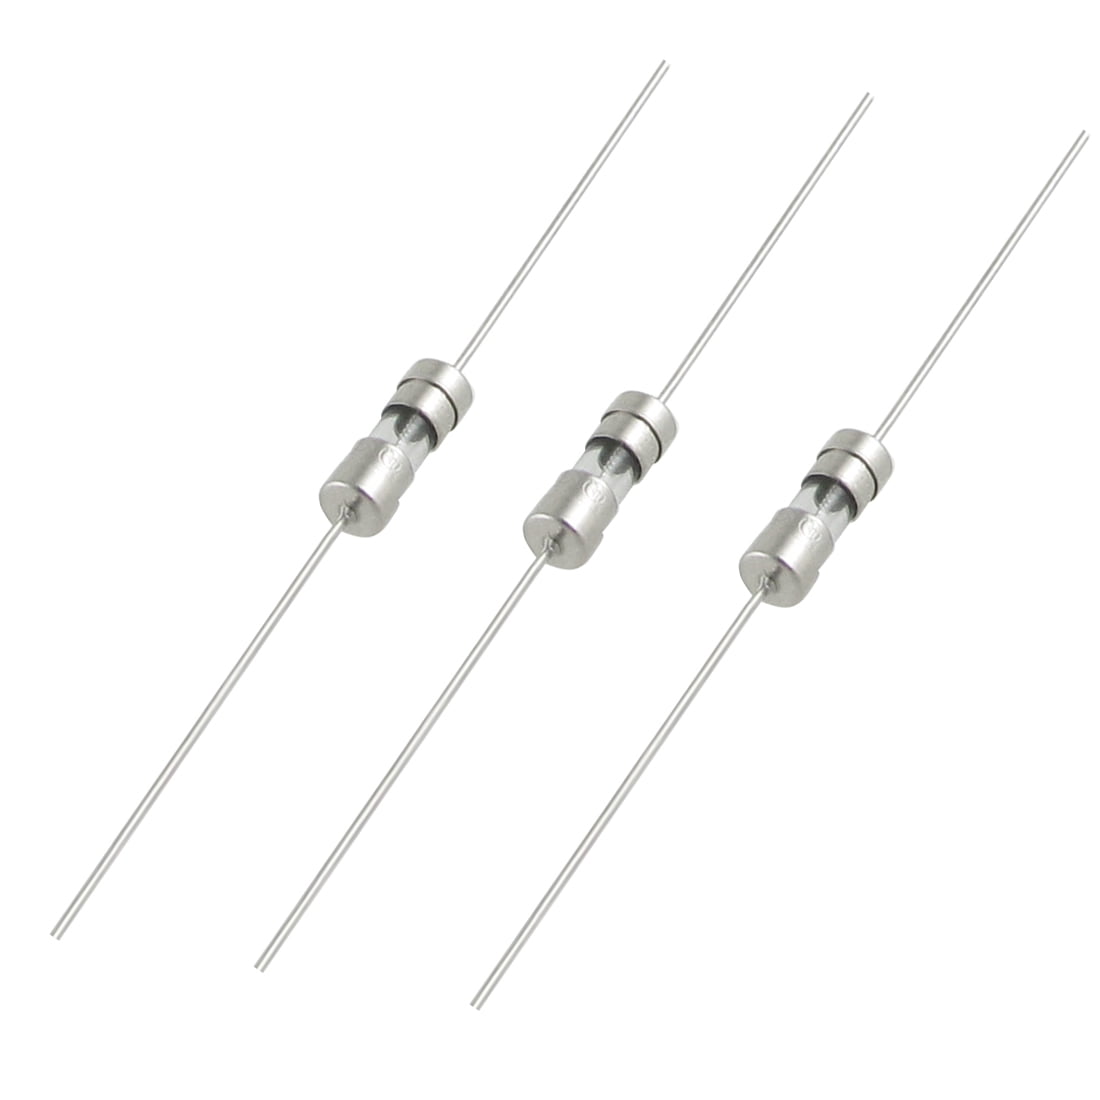 10pcs Glass Tube Fuse Axial Leads 3.6 x 10mm 15A T15A Slow Blow 250V 